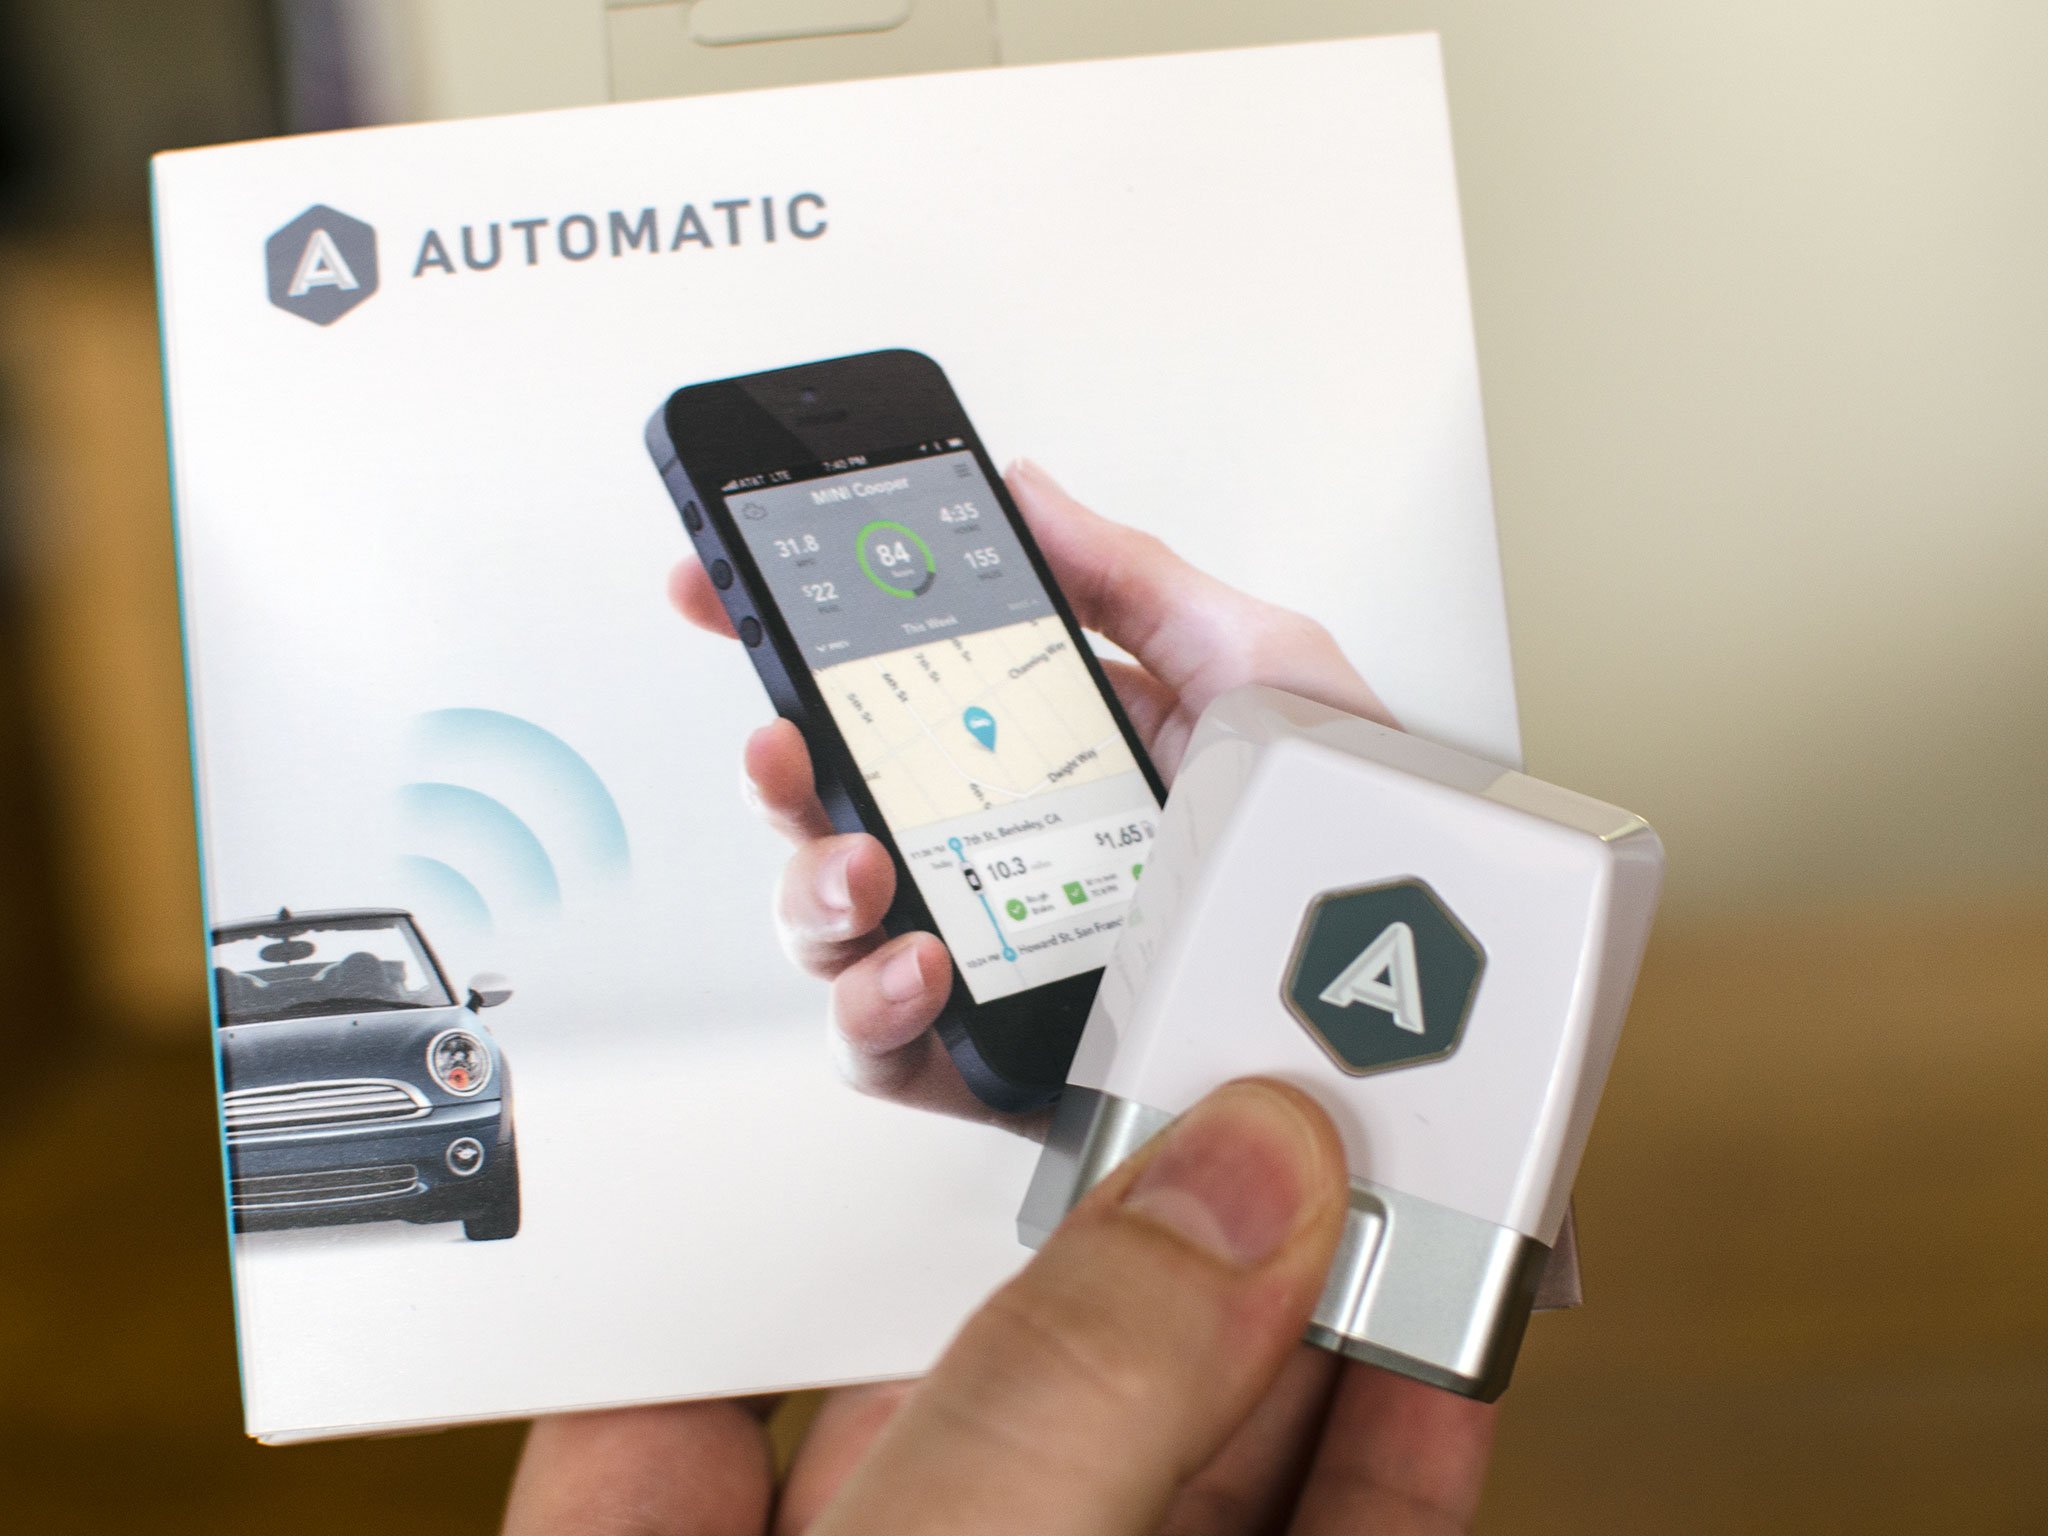 Automatic Labs updates Automatic with License+, teaches teens safe driving habits